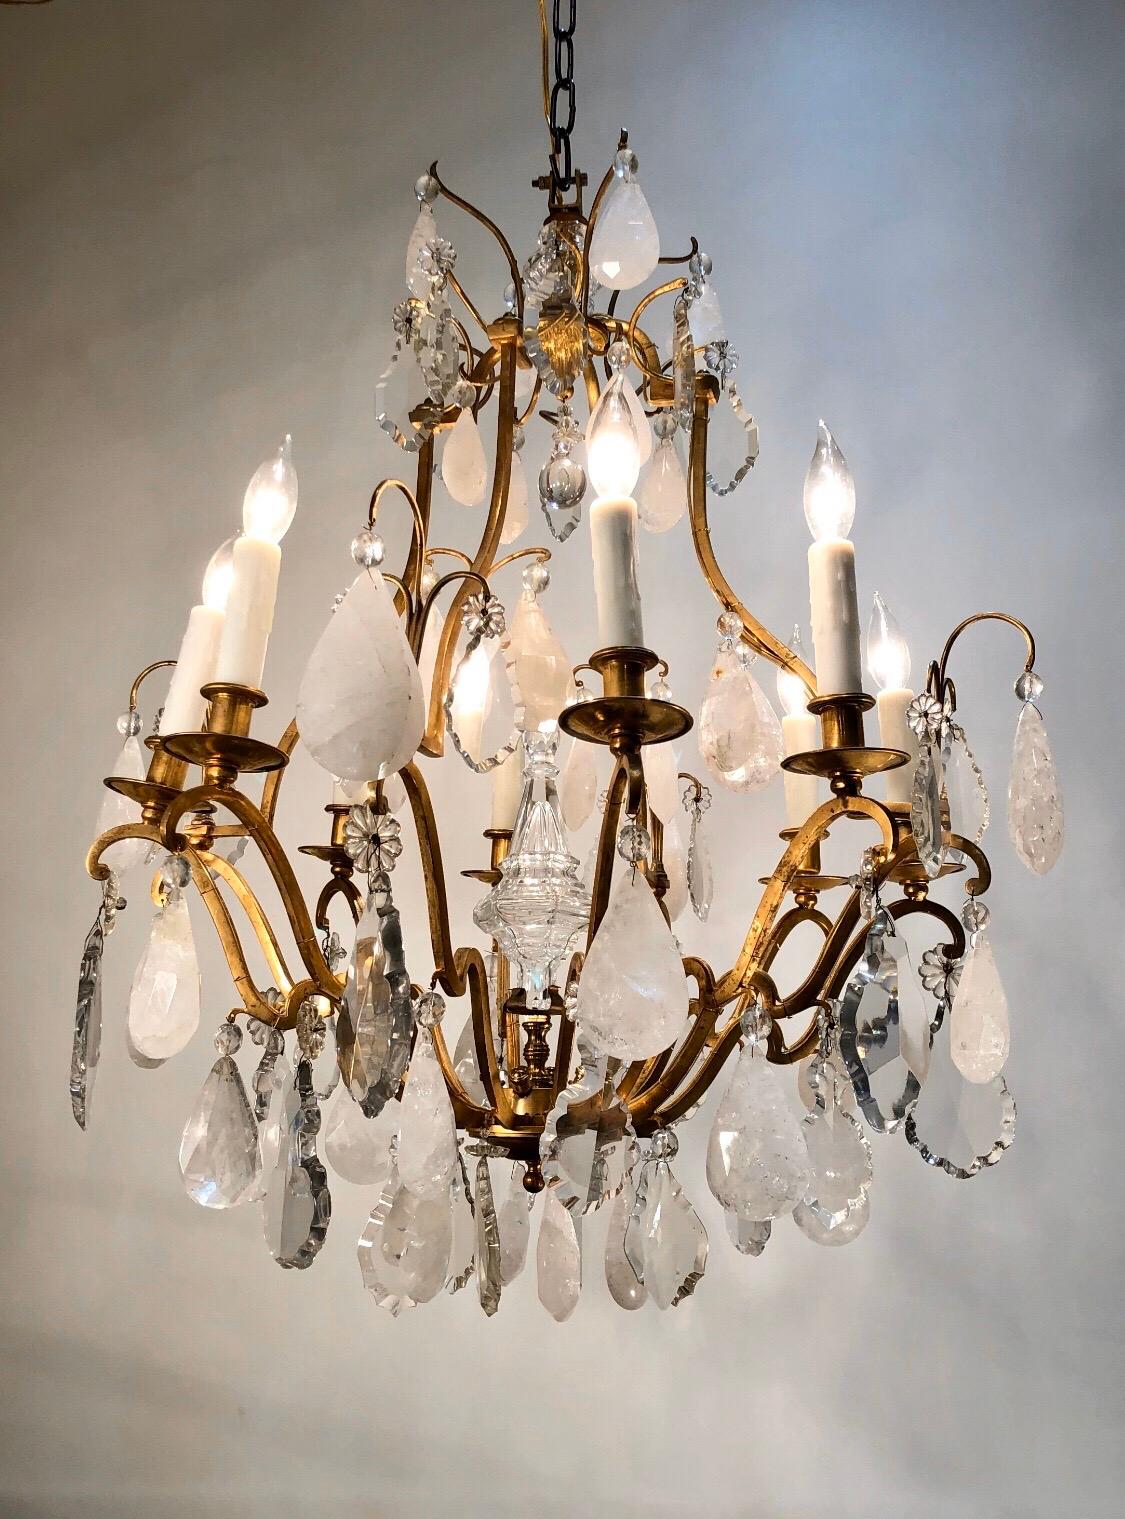 Elegant French LXV style bronze and rock crystal eight light chandelier. This chandelier has wonderful heavy handcut rock crystal prisms suspended from a Classic gilt bronze bird cage frame with eight candle arms.